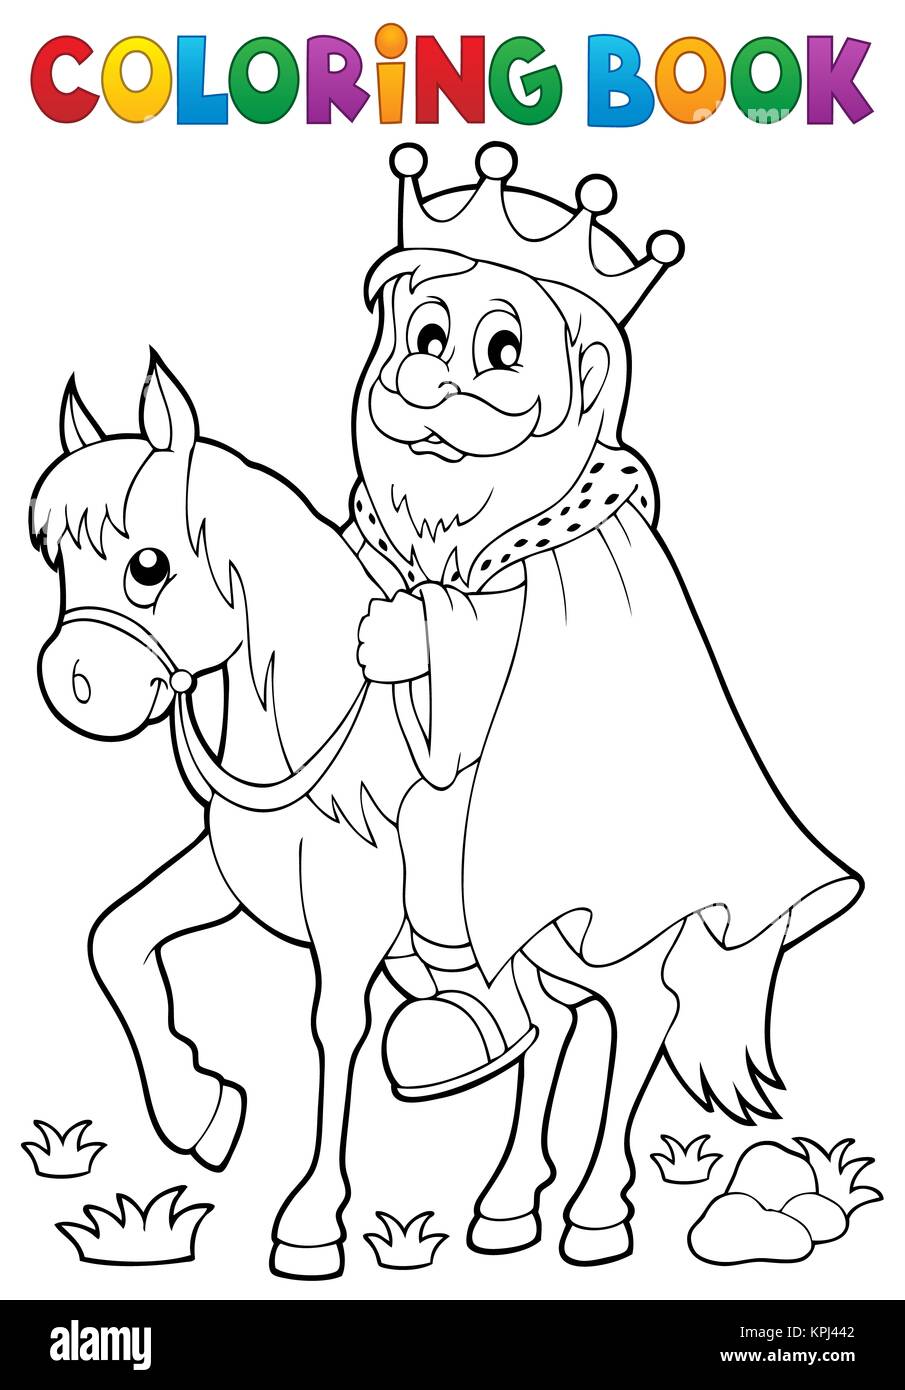 Coloring book king on horse theme 1 Stock Photo